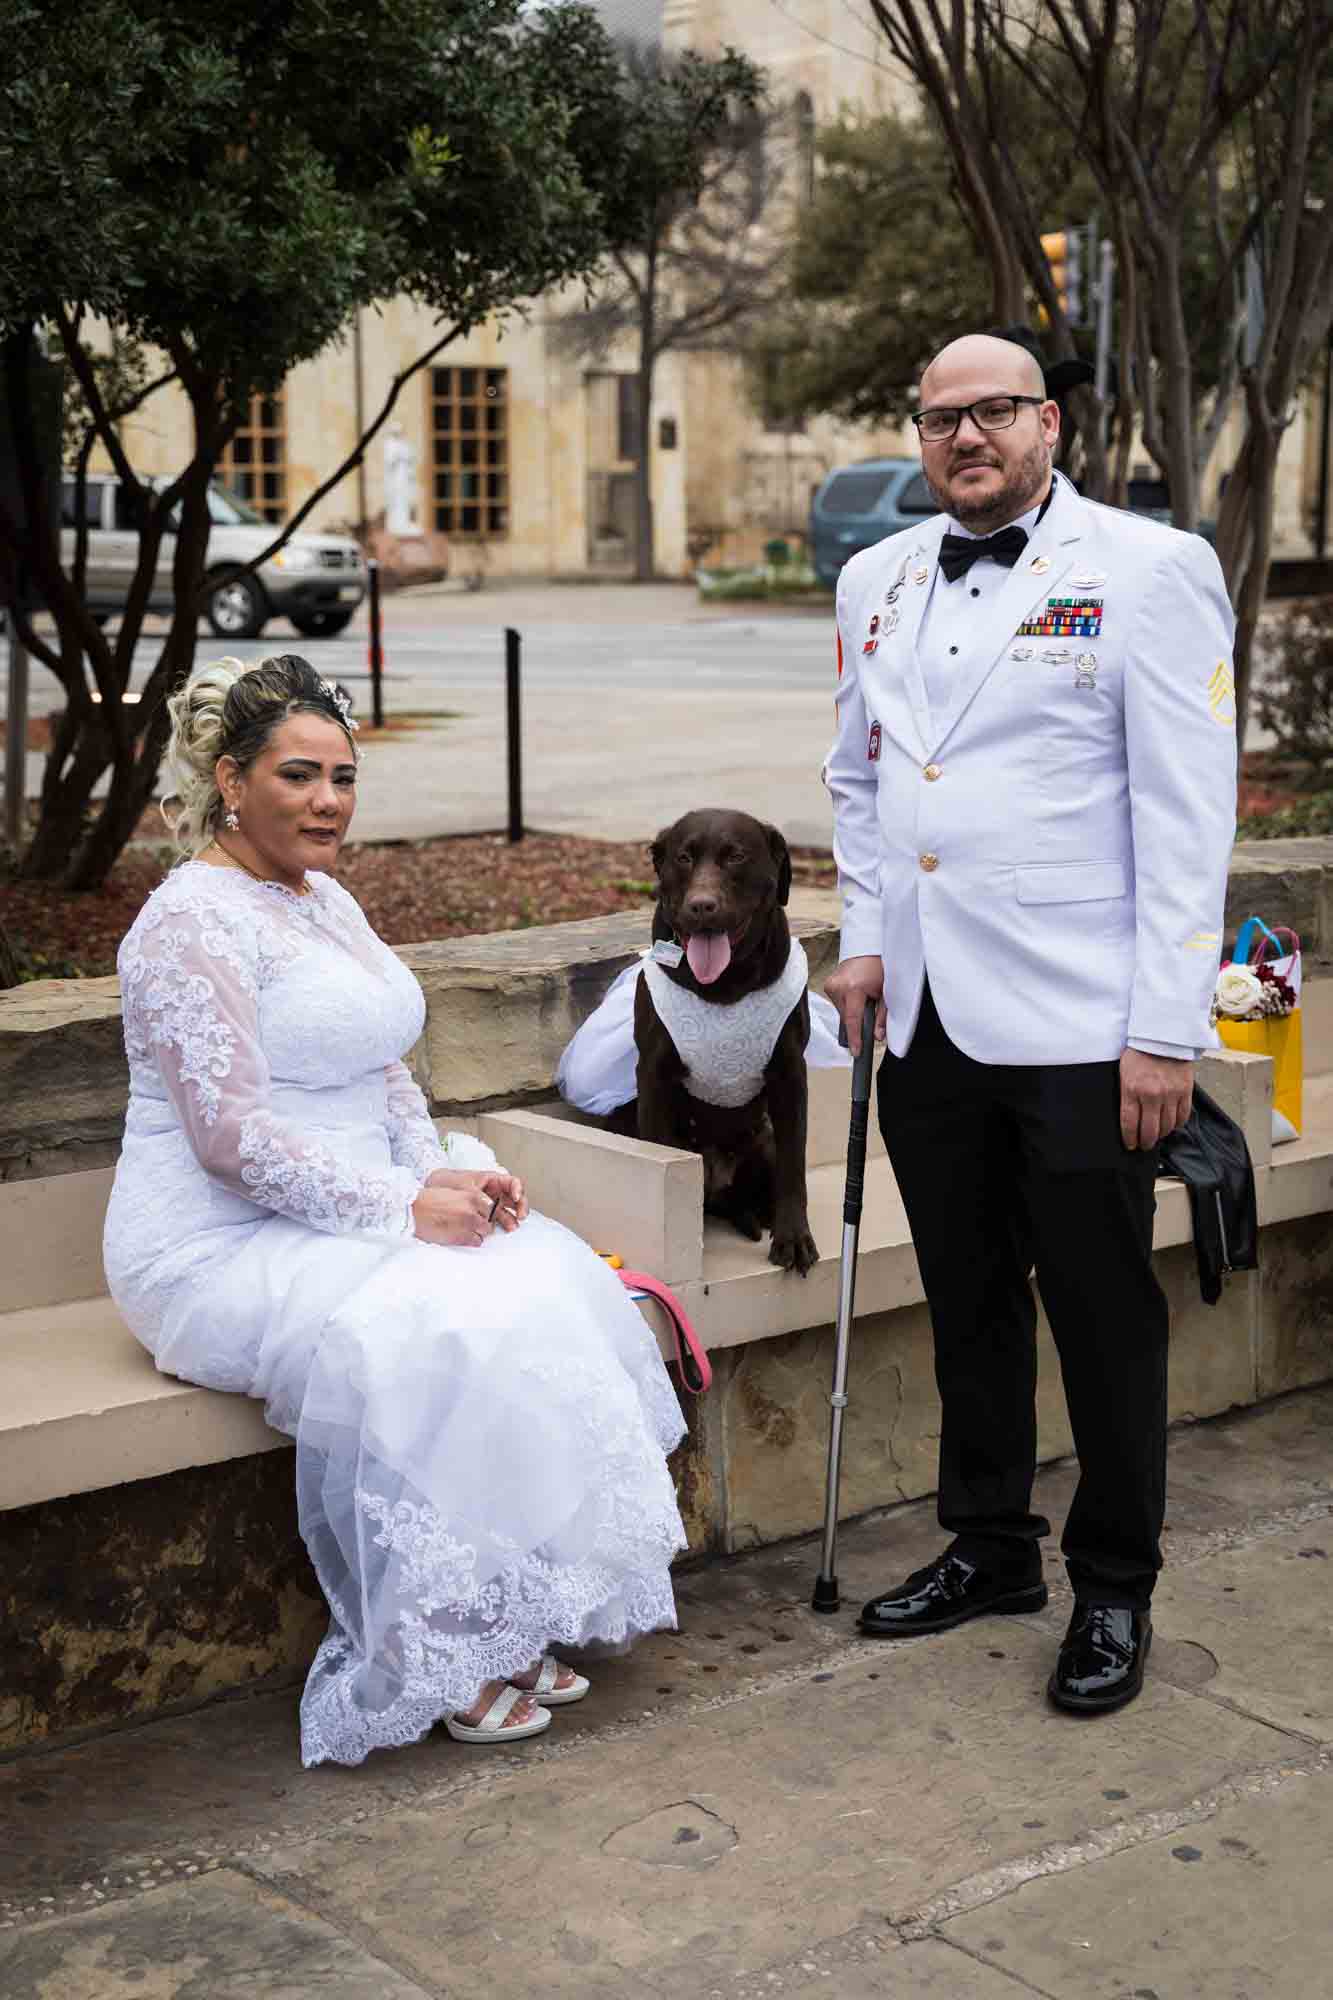 Bride and groom wearing white military uniform standing with brown labrador dog wearing wedding dress